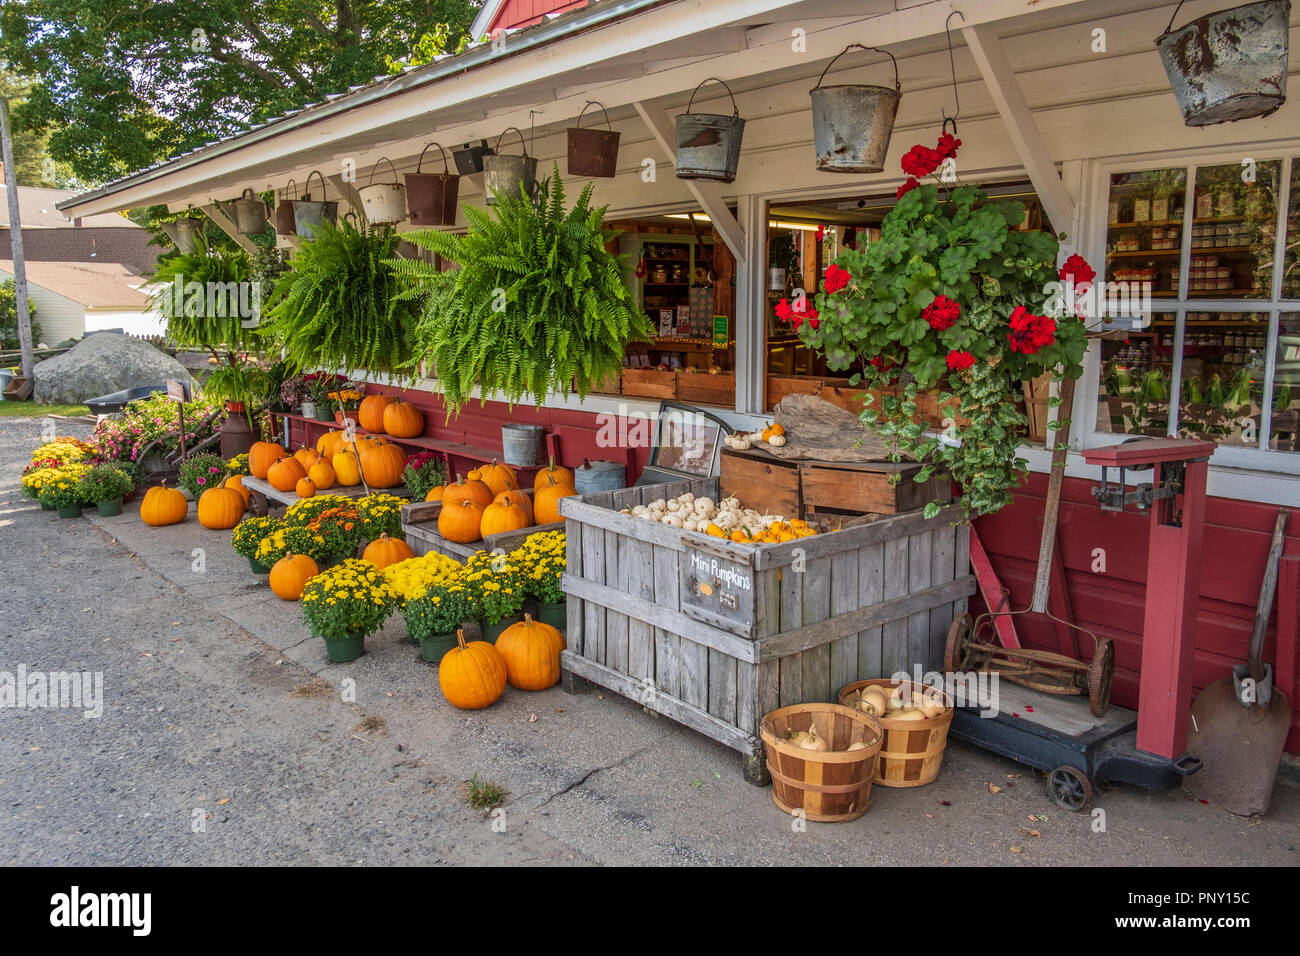 Farm stand in the fall selling pumpkins Stock Photo